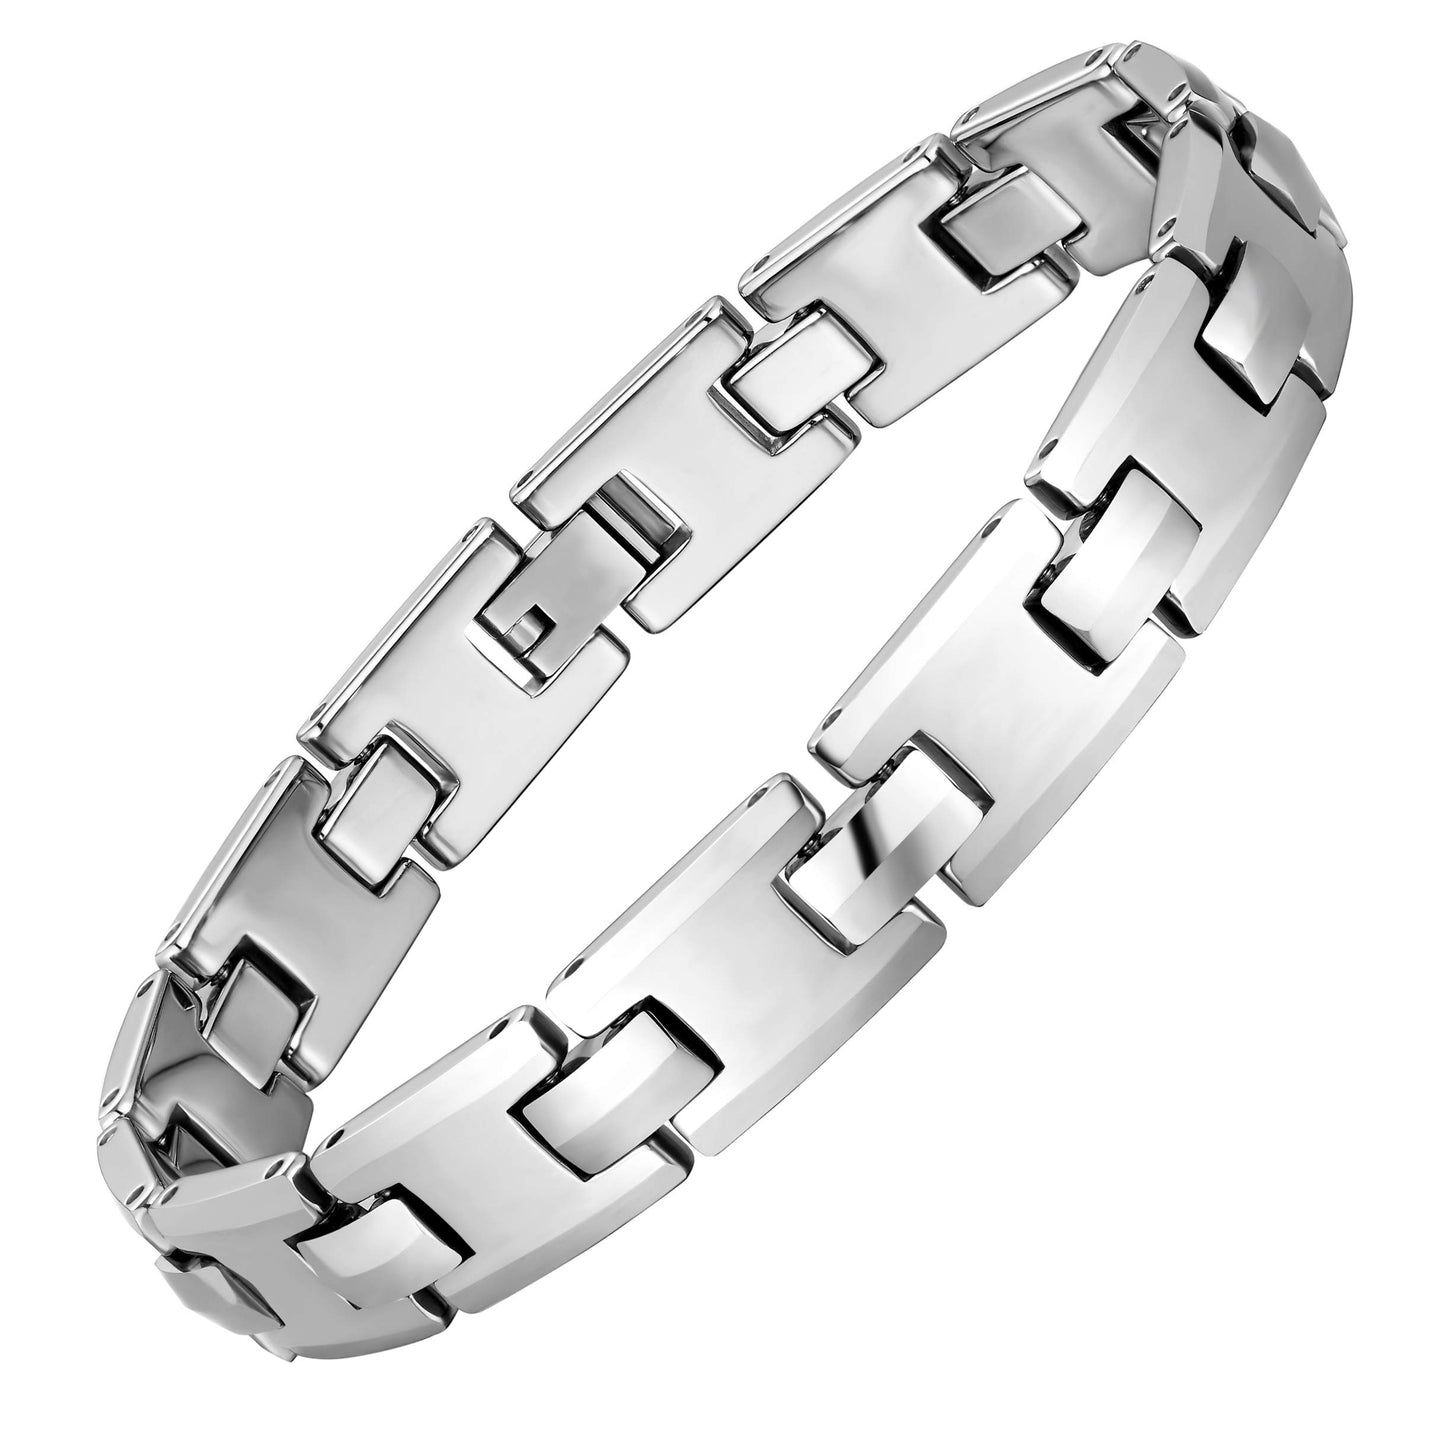 URBAN JEWELRY Stunning Solid Tungsten Link Bracelet for Men Polished Link, Puzzle, Ceramic Style (Silver, Black, 18K Gold Plated Option)